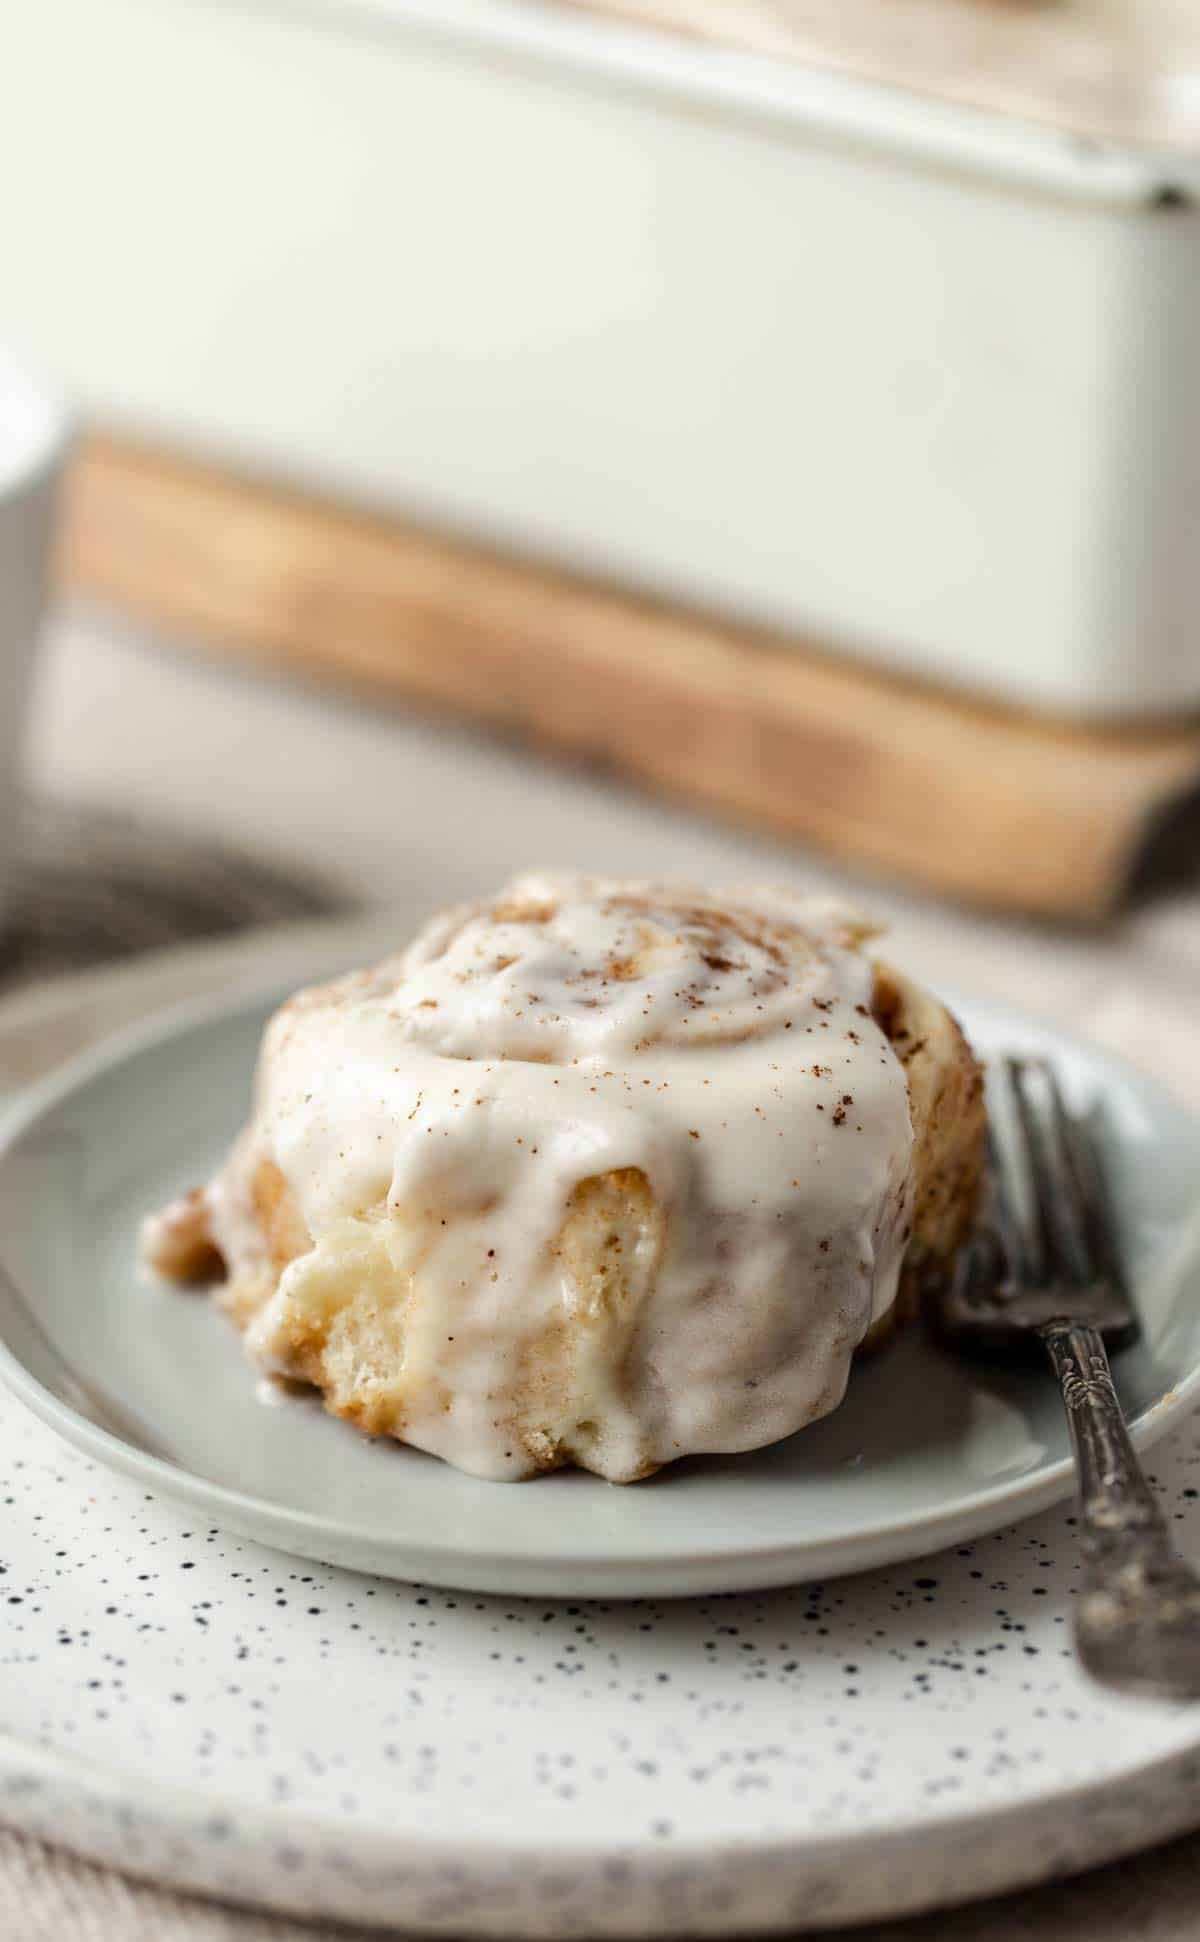 Gooey Cinnamon Rolls with sweet spiced chai filling topped with a thick, luscious layer of cream cheese frosting. cinnamon rolls | cinnamon roll recipe | cinnamon roll icing | chai cinnamon rolls